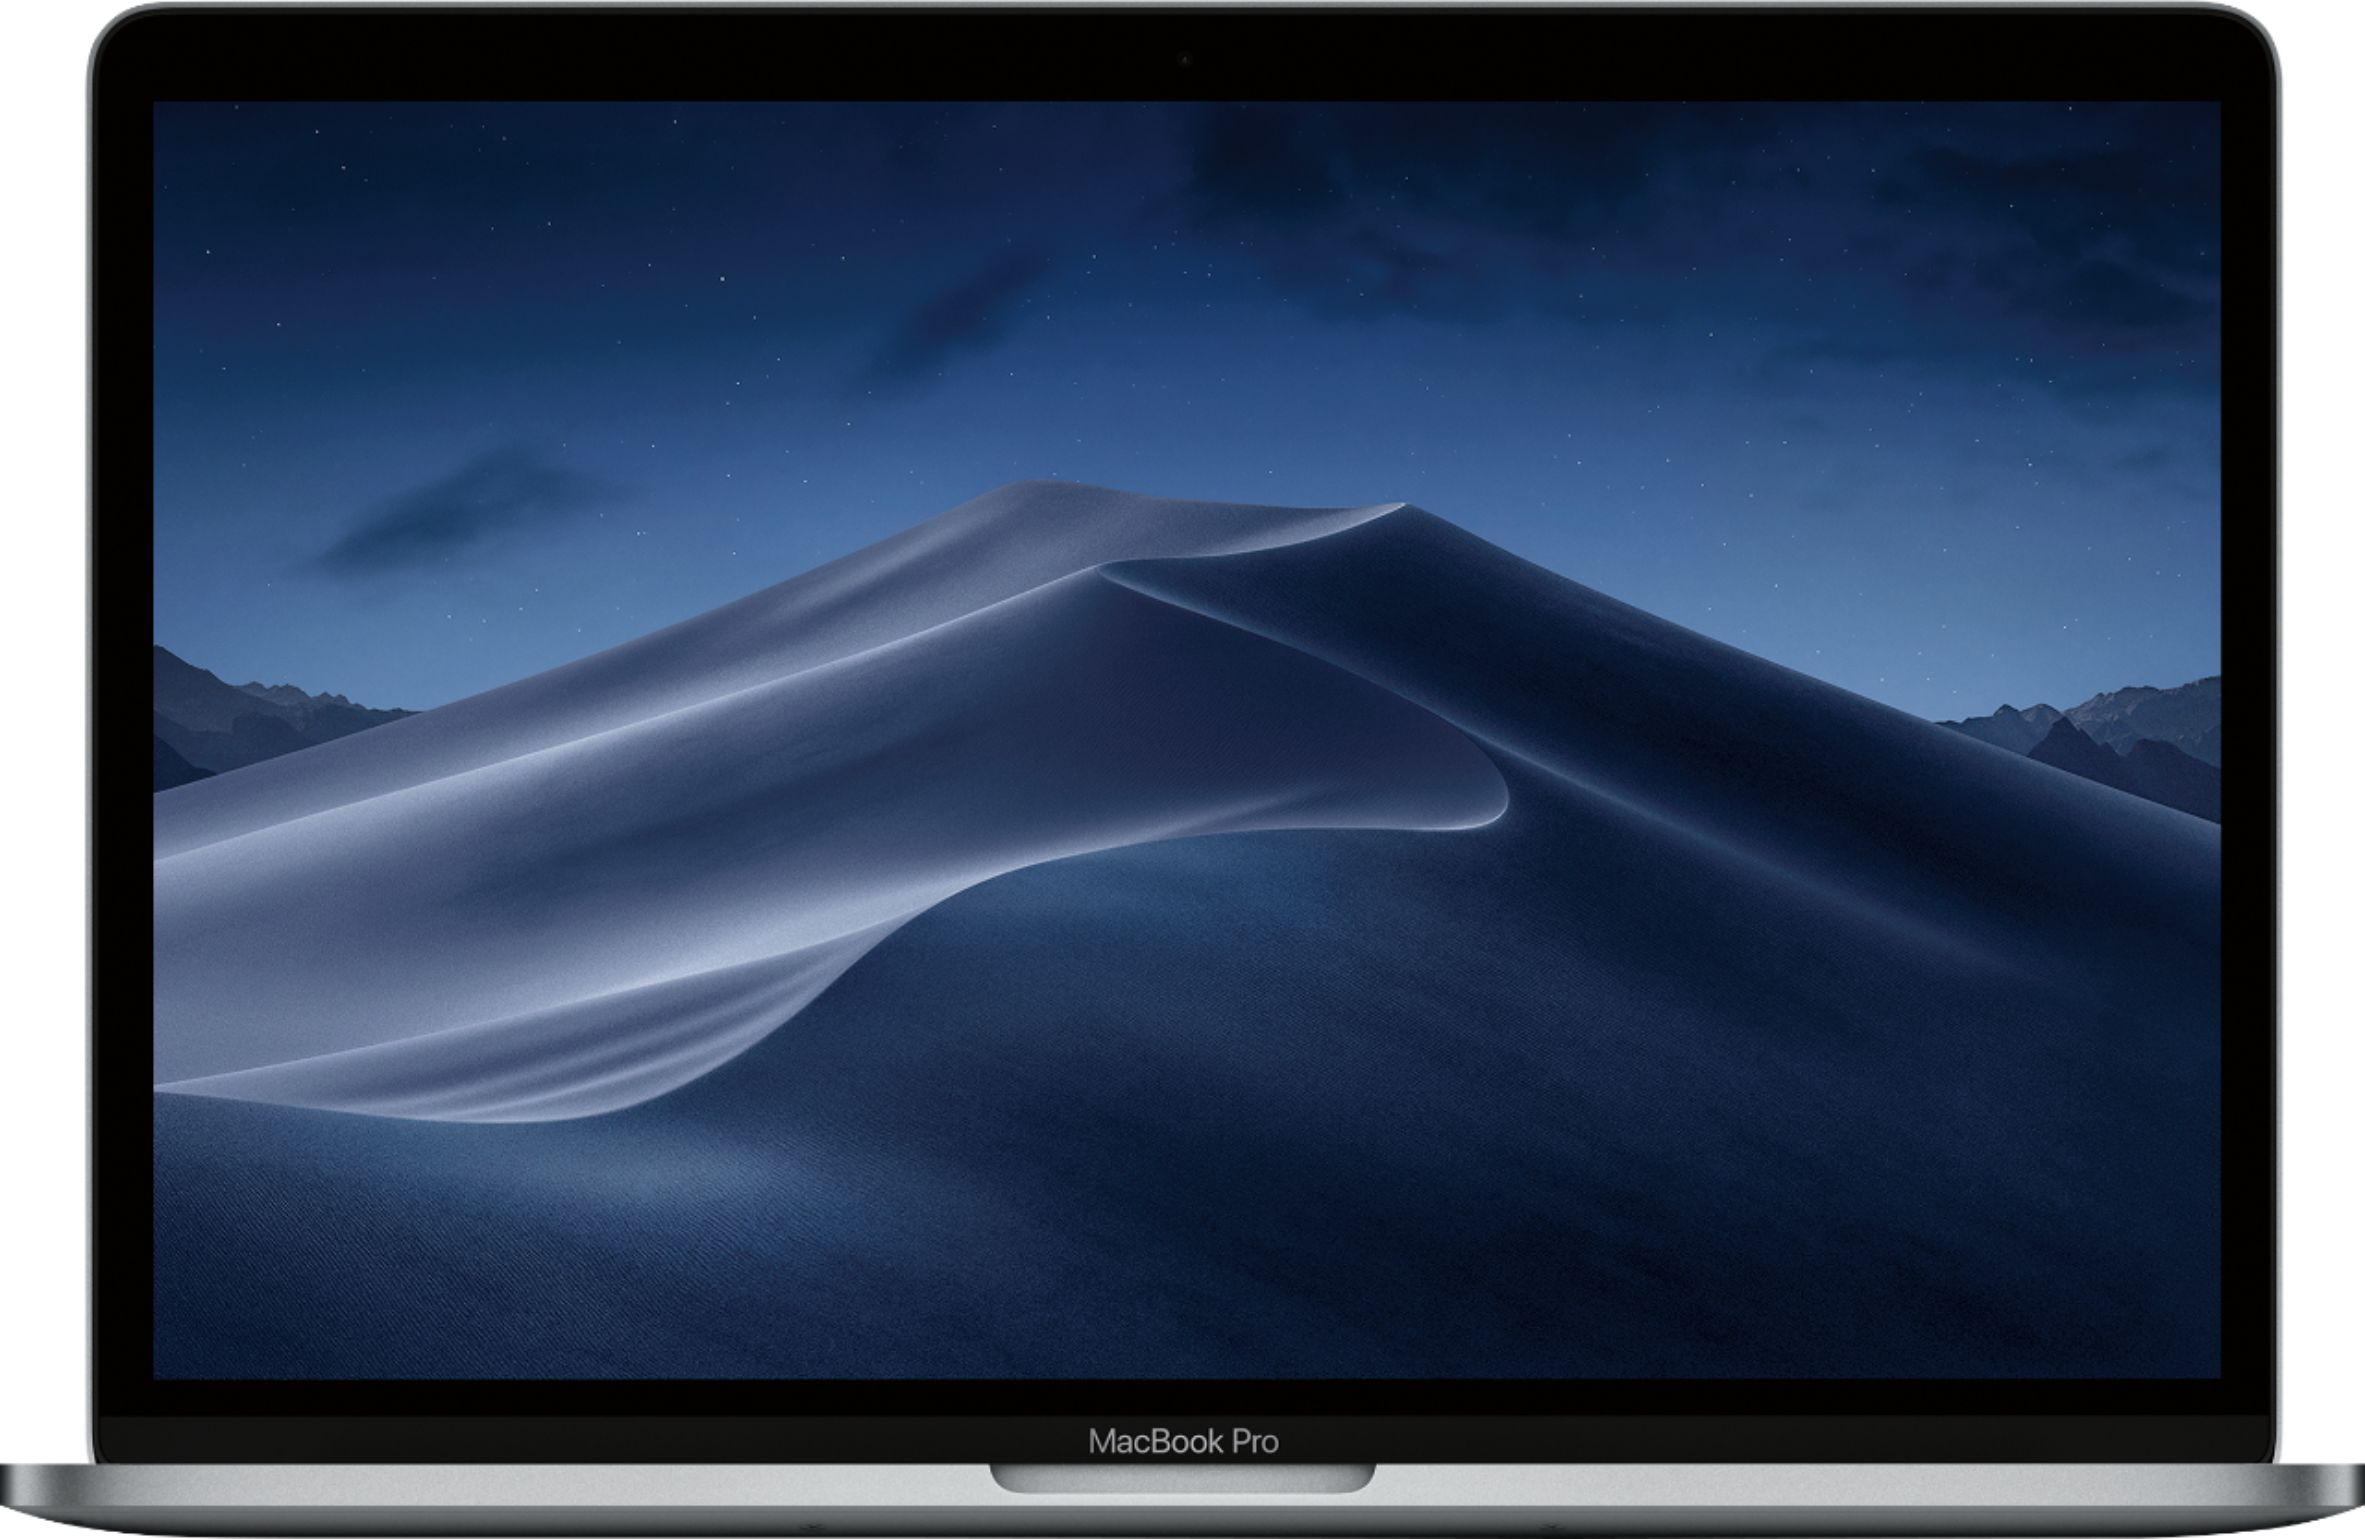 Apple - MacBook Pro 15.4" Display with Touch Bar - Intel Core i9 - 16GB Memory - AMD Radeon Pro 560X - 512GB SSD - Space Gray